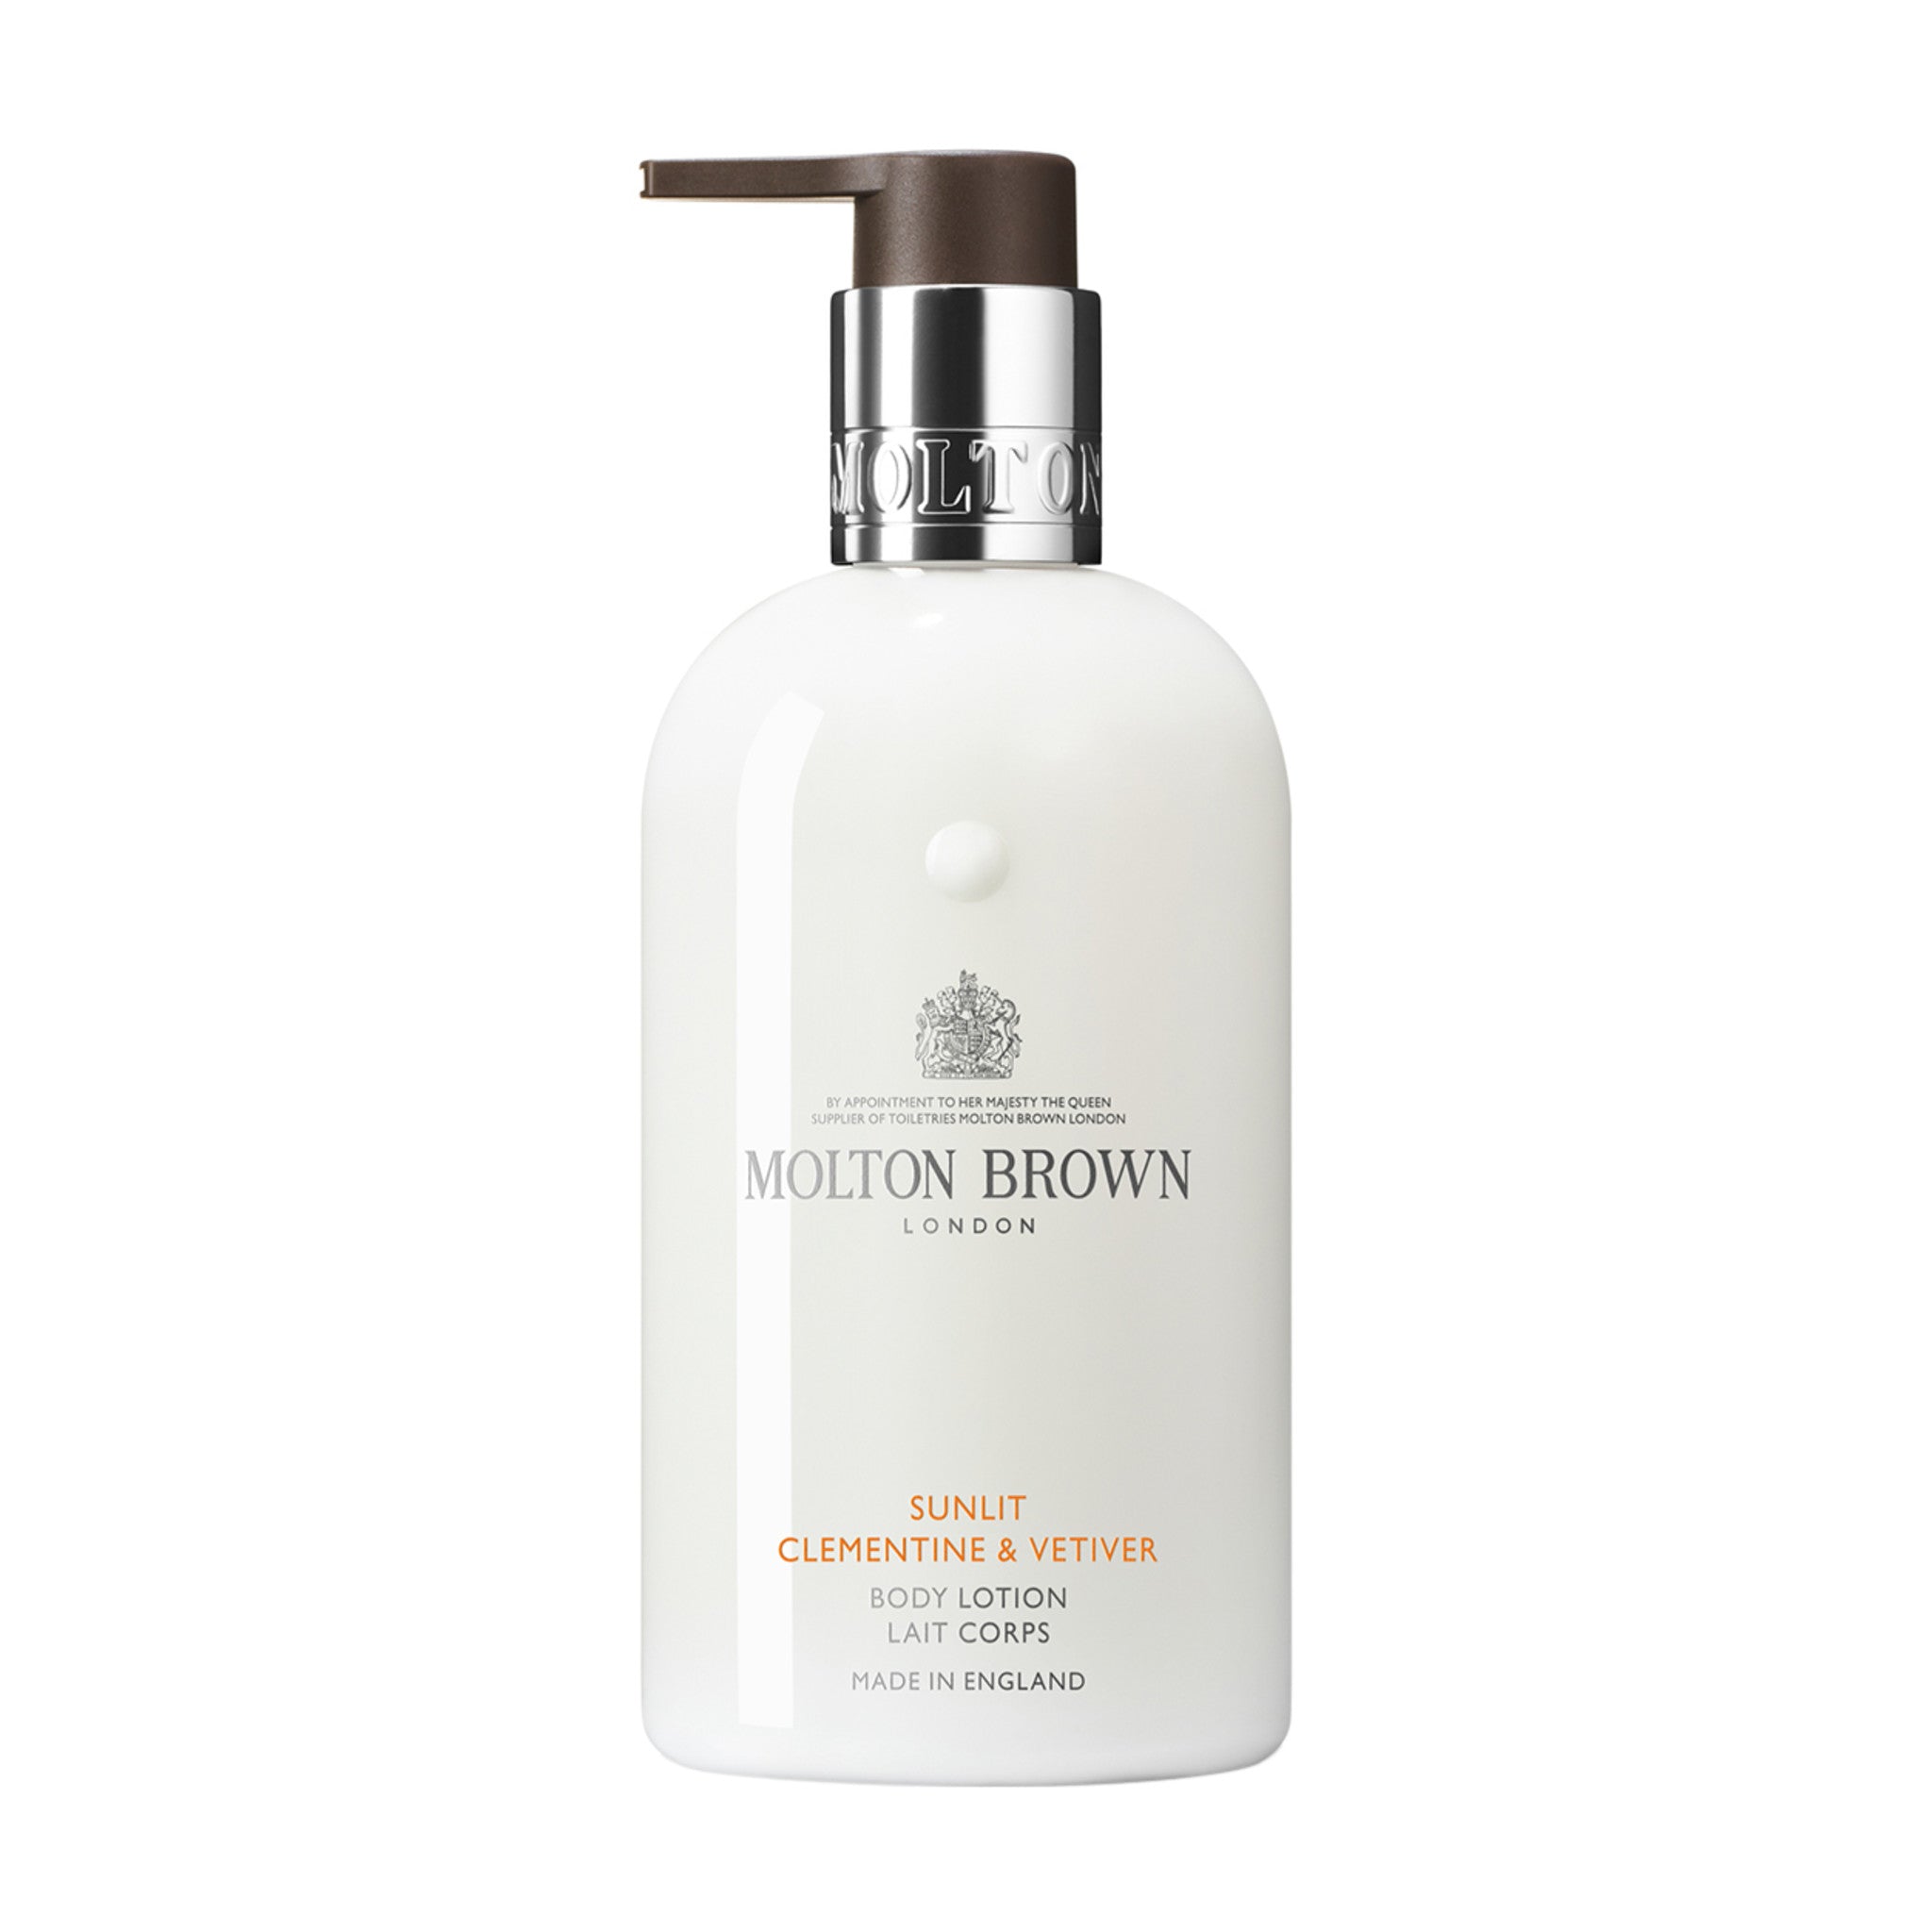 Molton Brown Sunlit Clementine And Vetiver Body Lotion main image.